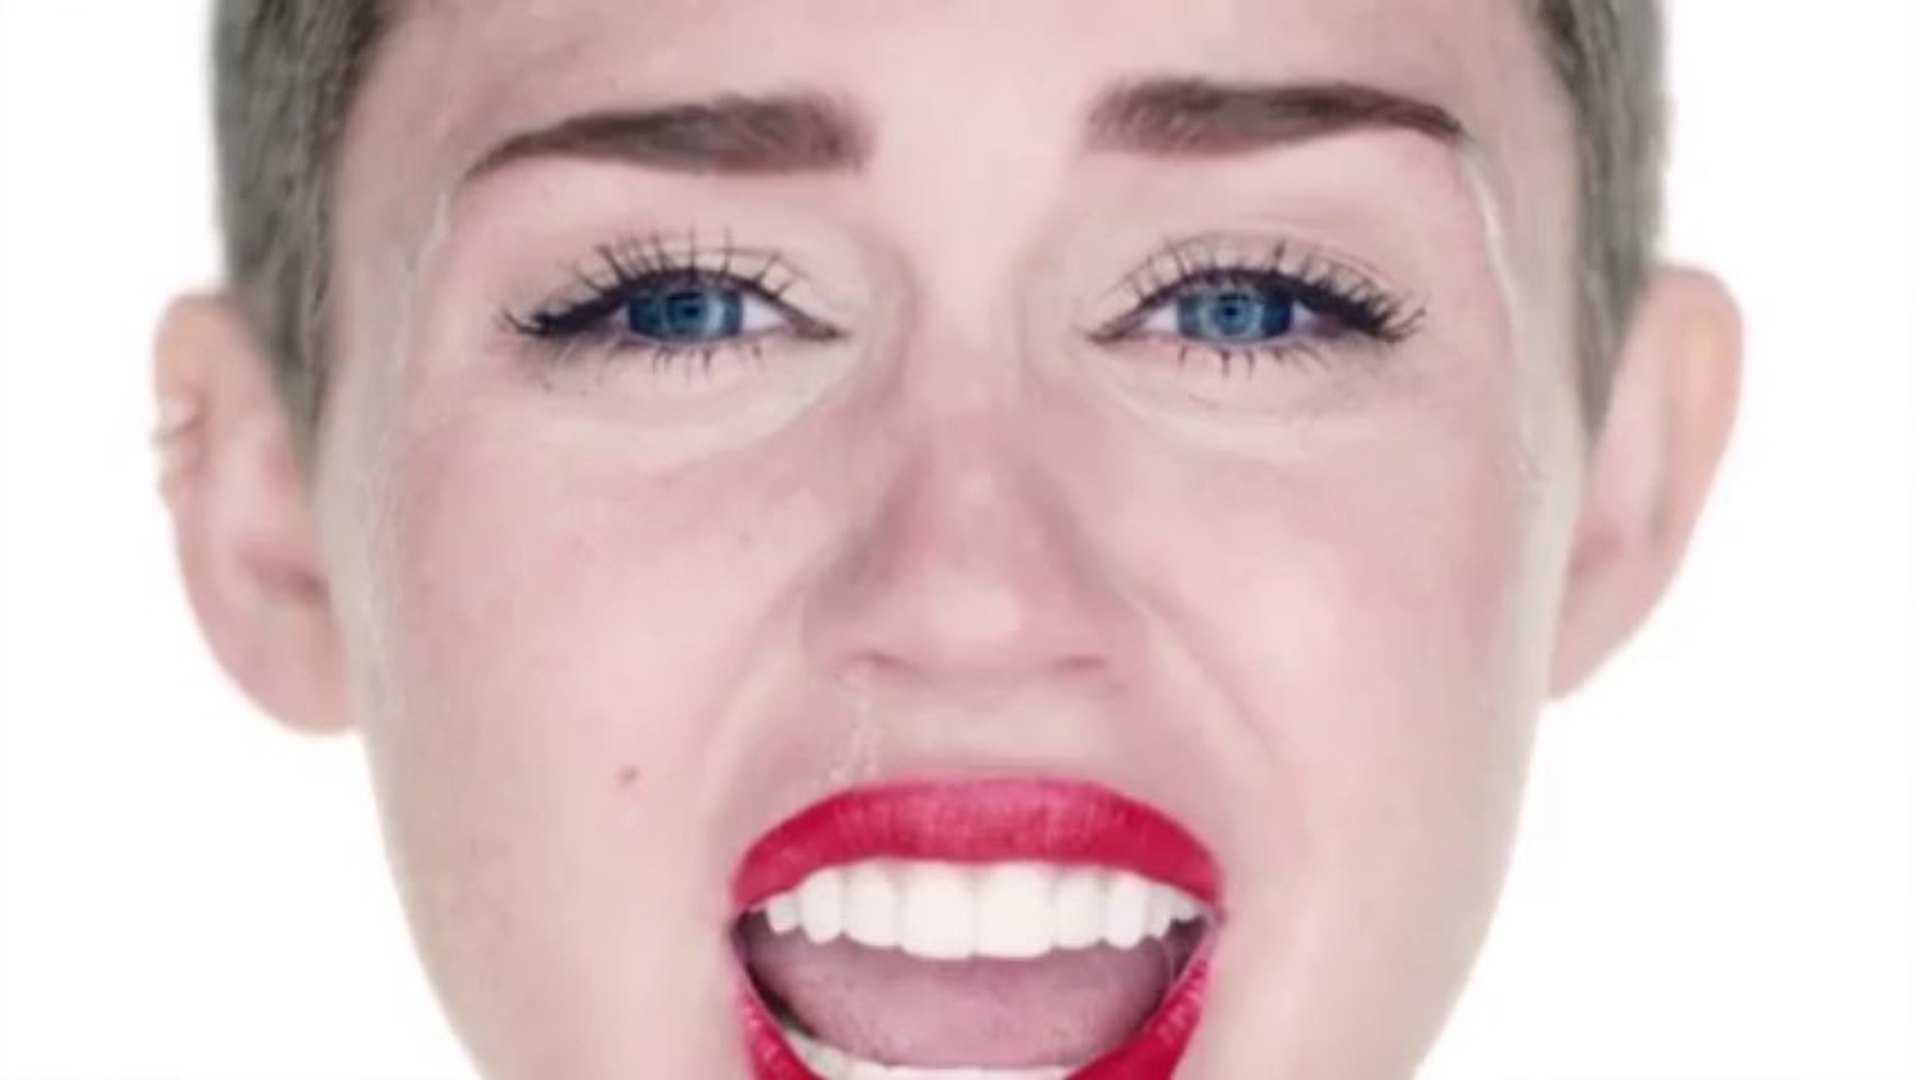 Incredible Miley Cyrus/Sinéad O'Connor Mash-Up!!! Nothing Compares To Wrecking Ball